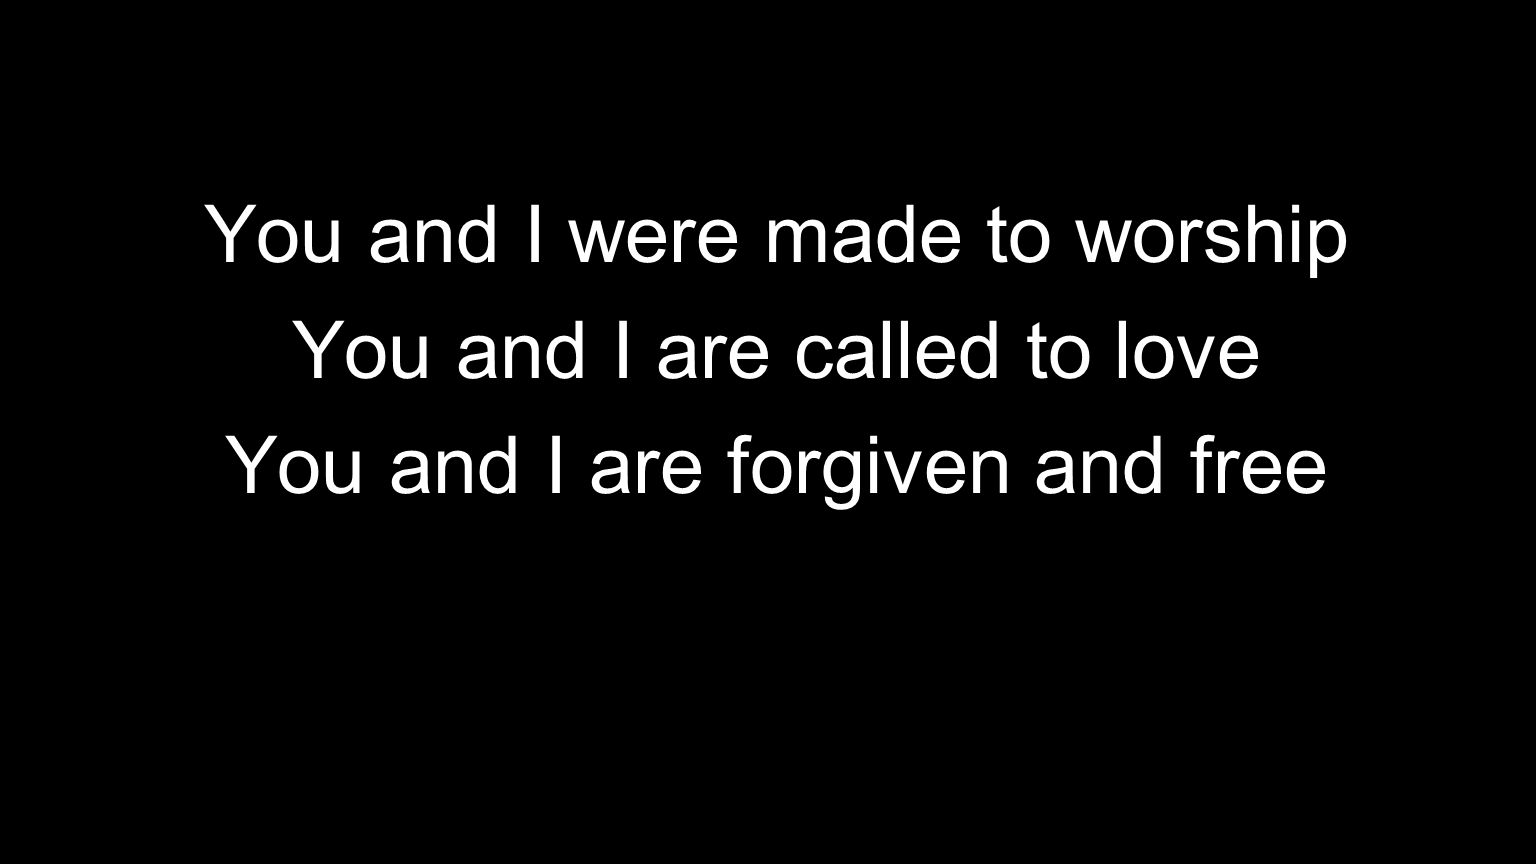 You and I were made to worship You and I are called to love You and I are forgiven and free